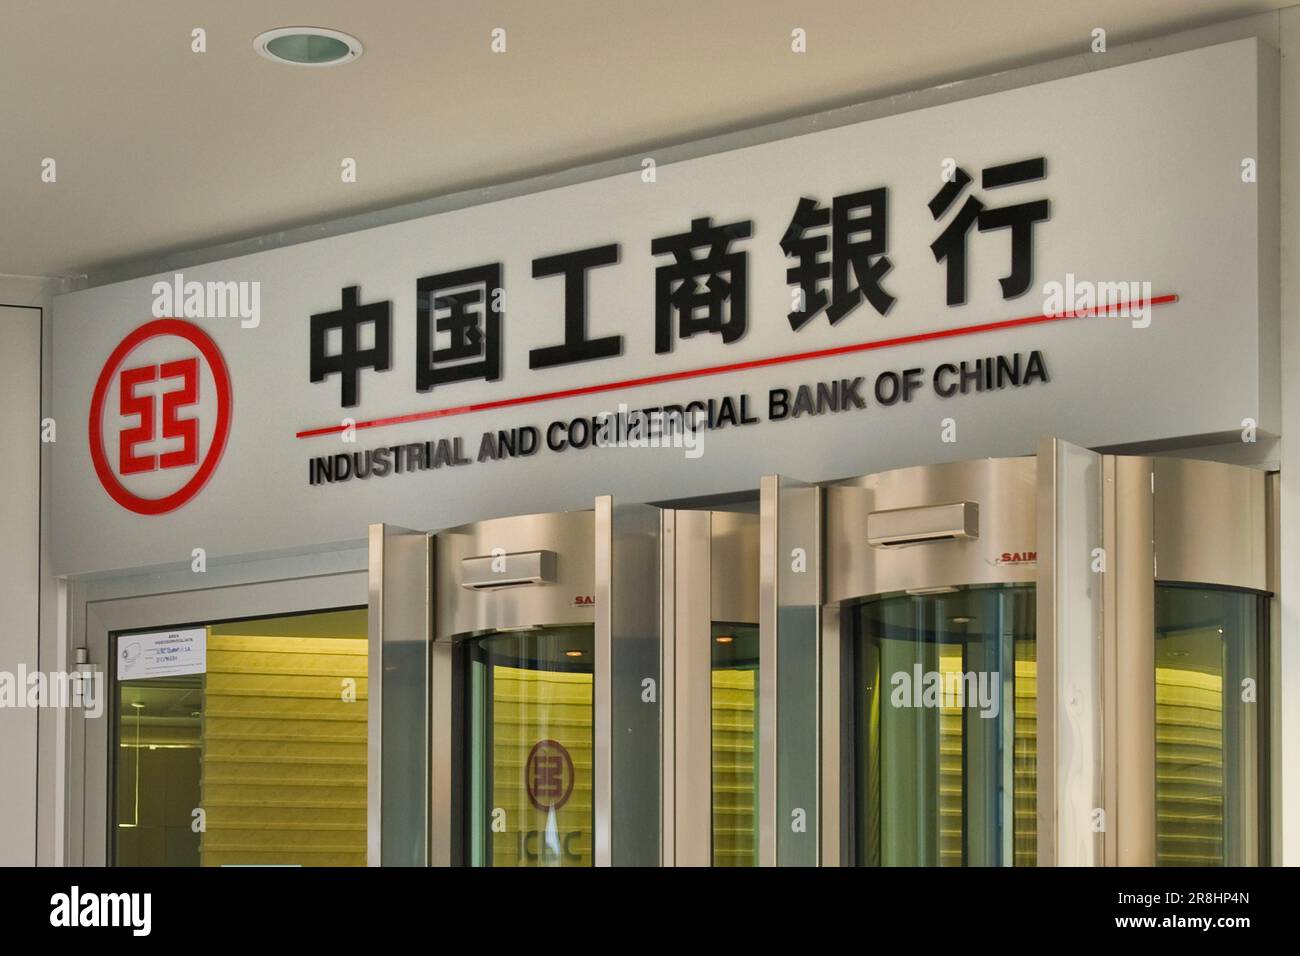 Industrial and Commercial Bank of China. Chinese Bank. Milan. Lombardy. Italy Stock Photo